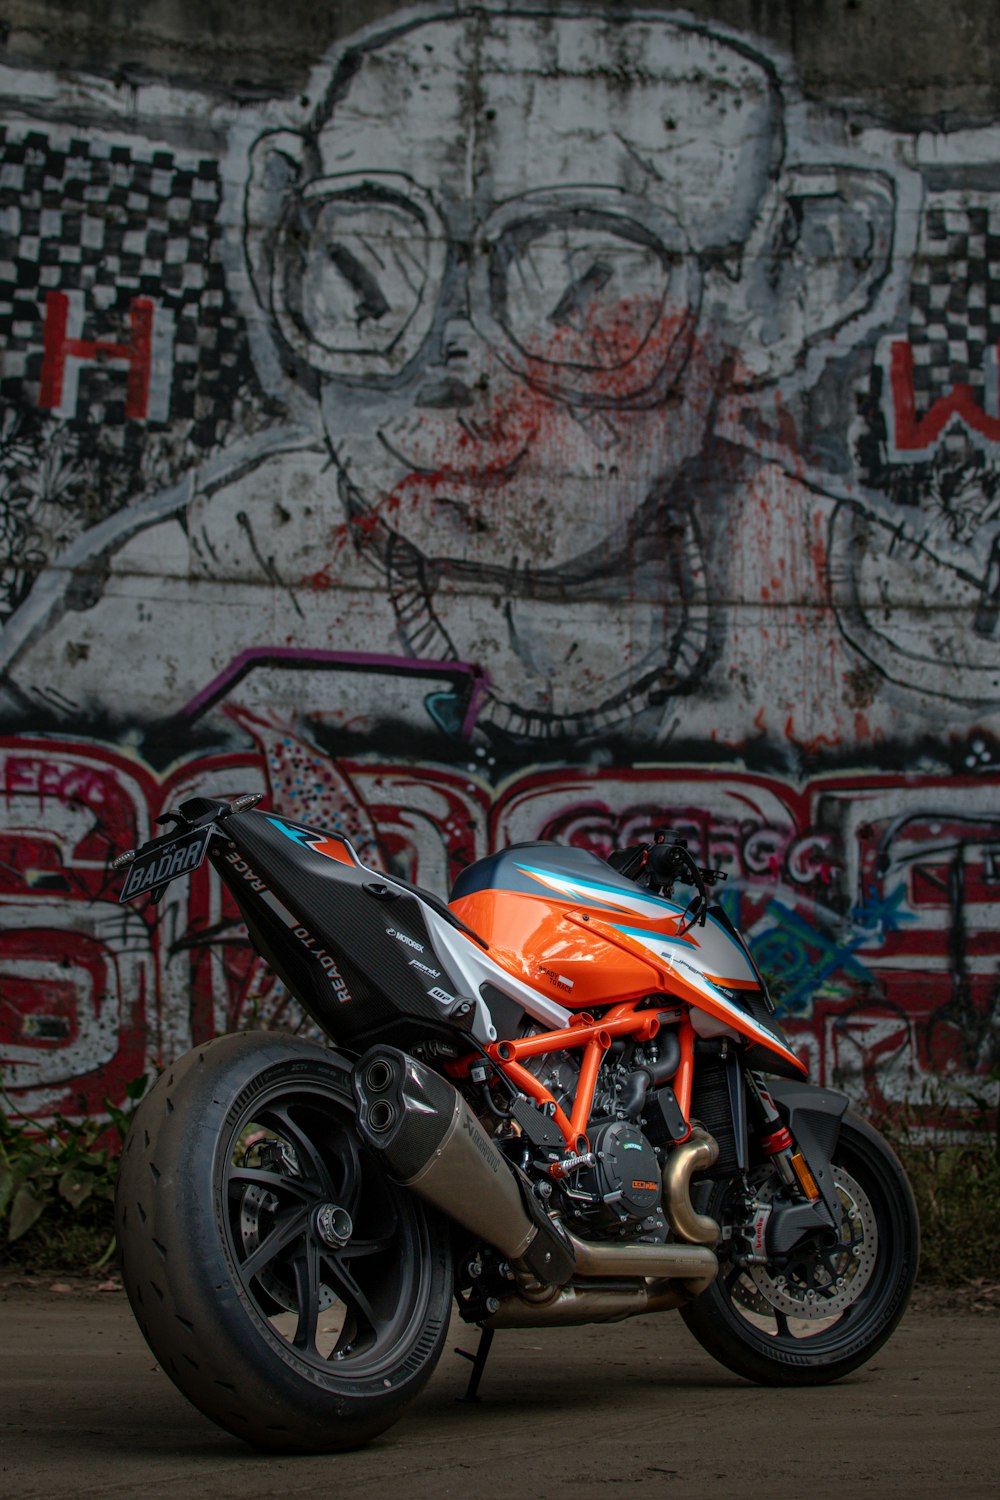 a motorcycle parked in front of a graffiti covered wall